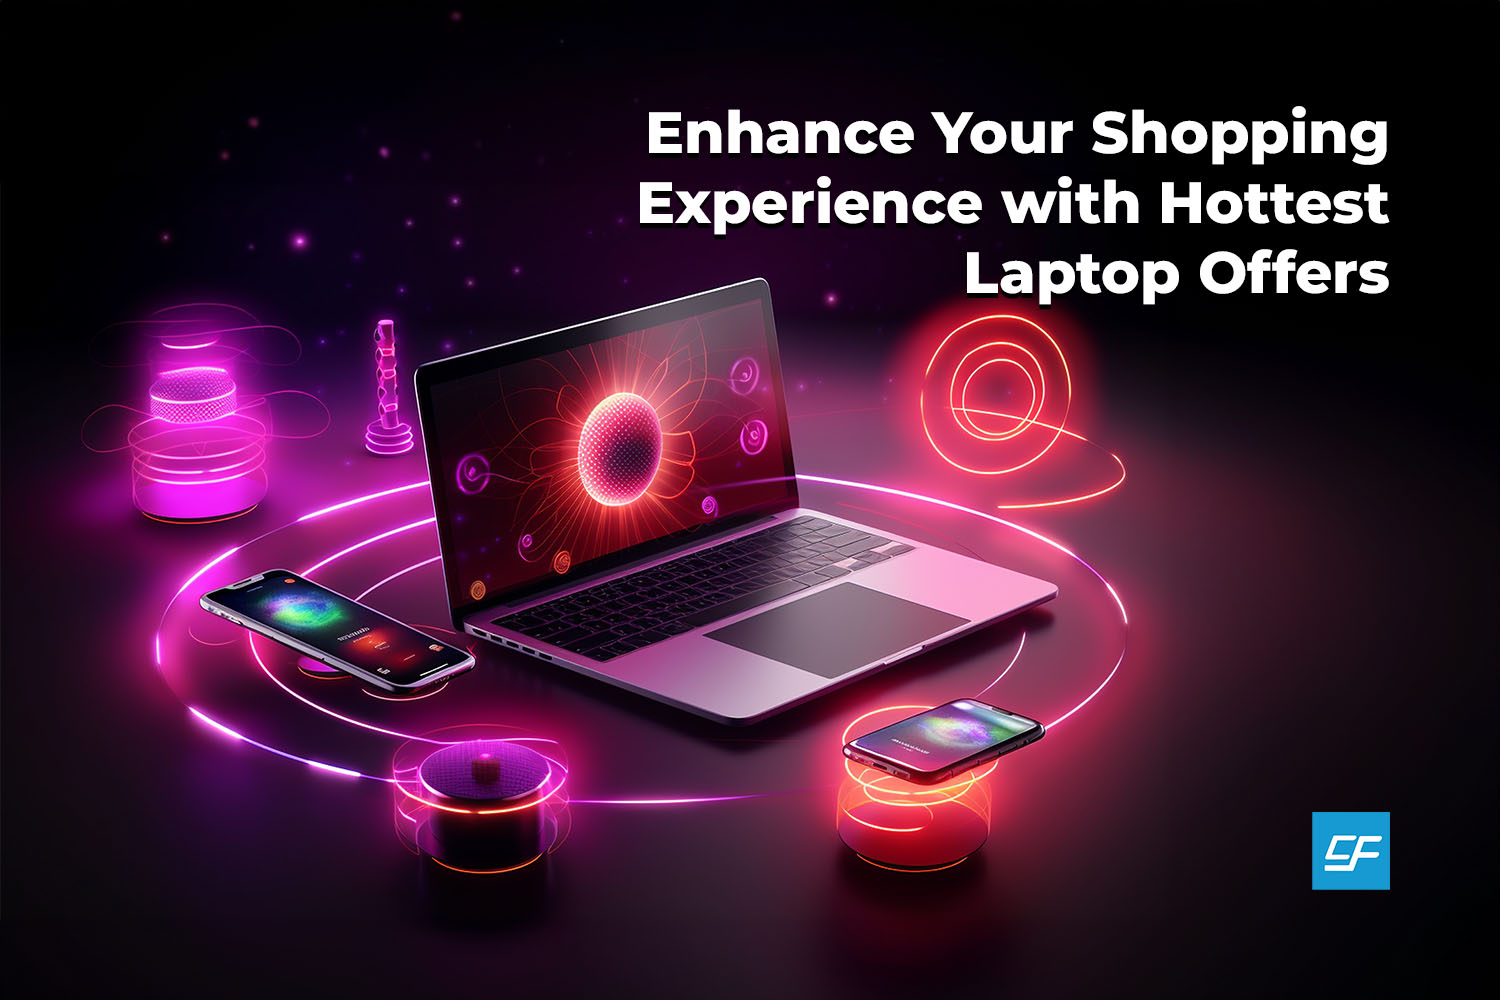 Enhance Your Shopping Experience with Hottest Laptop Offers